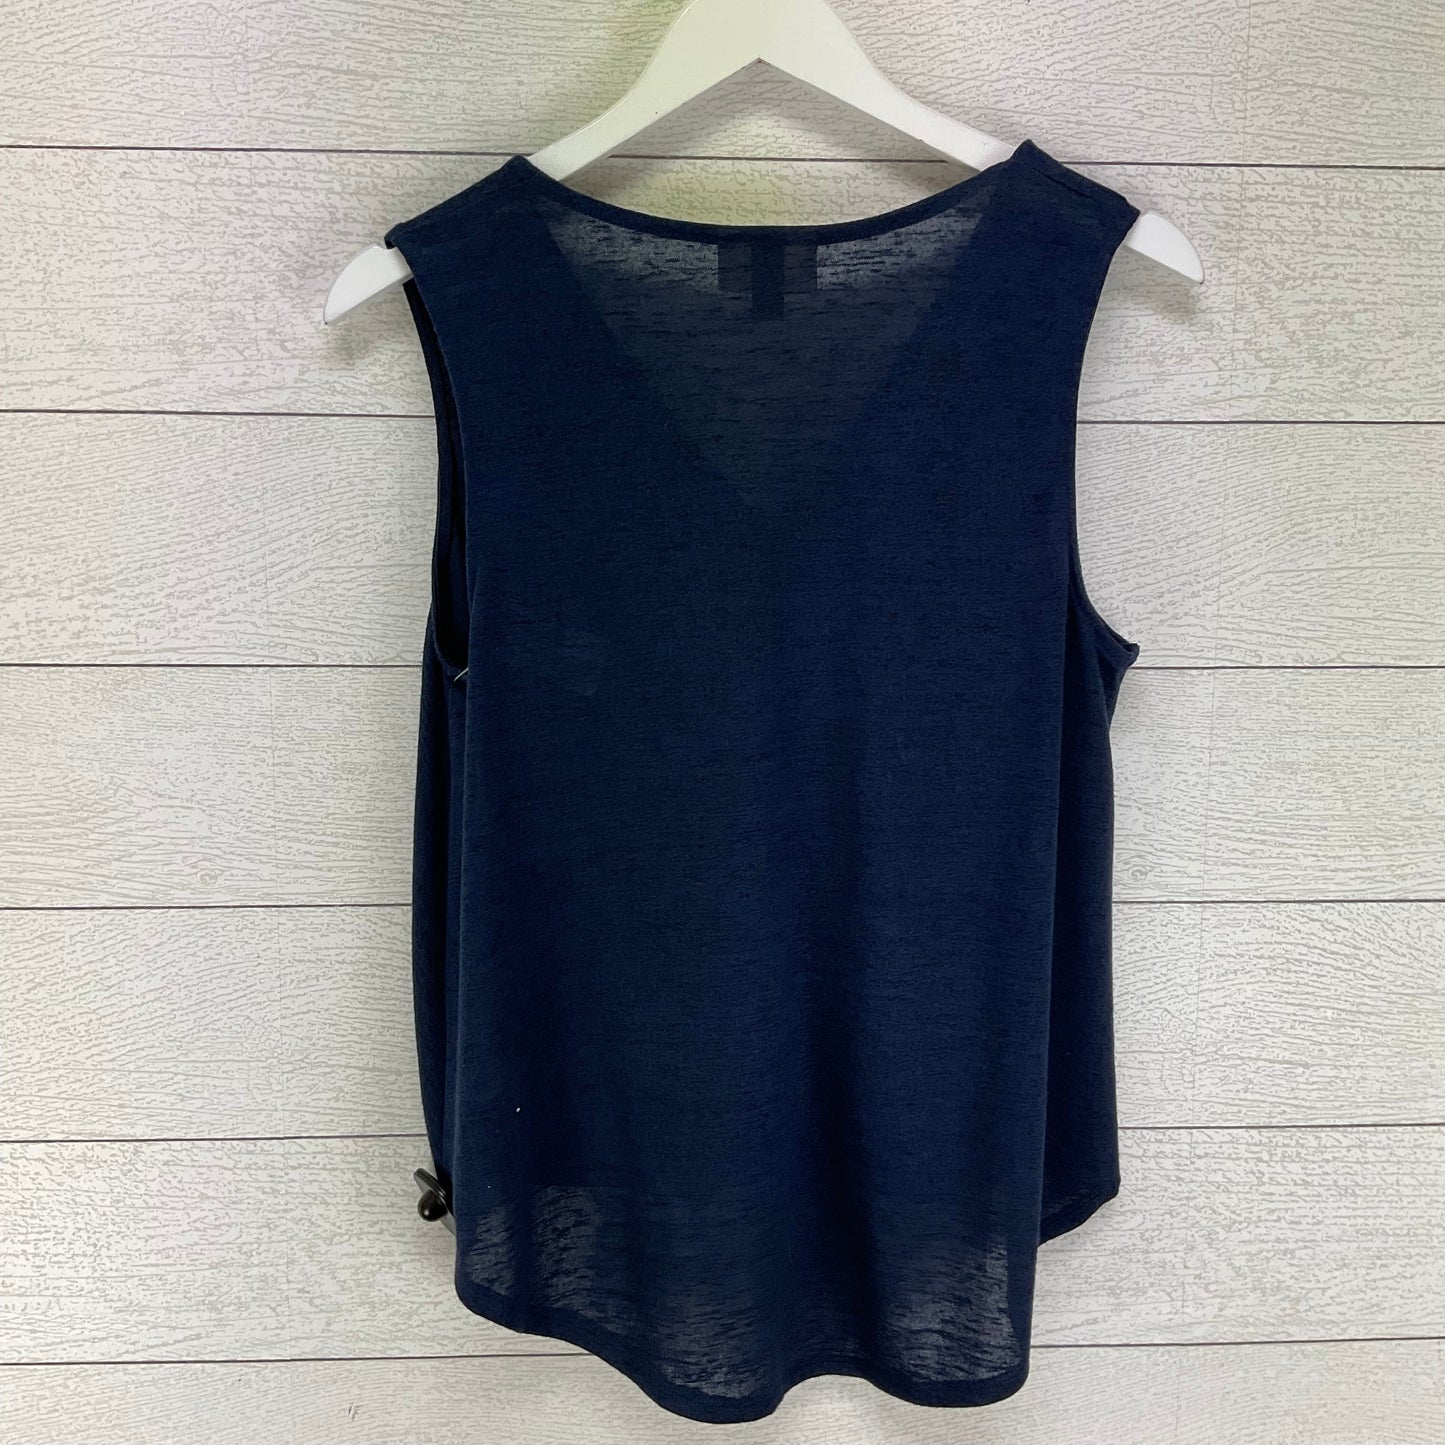 Top Sleeveless Basic By Universal Thread  Size: M